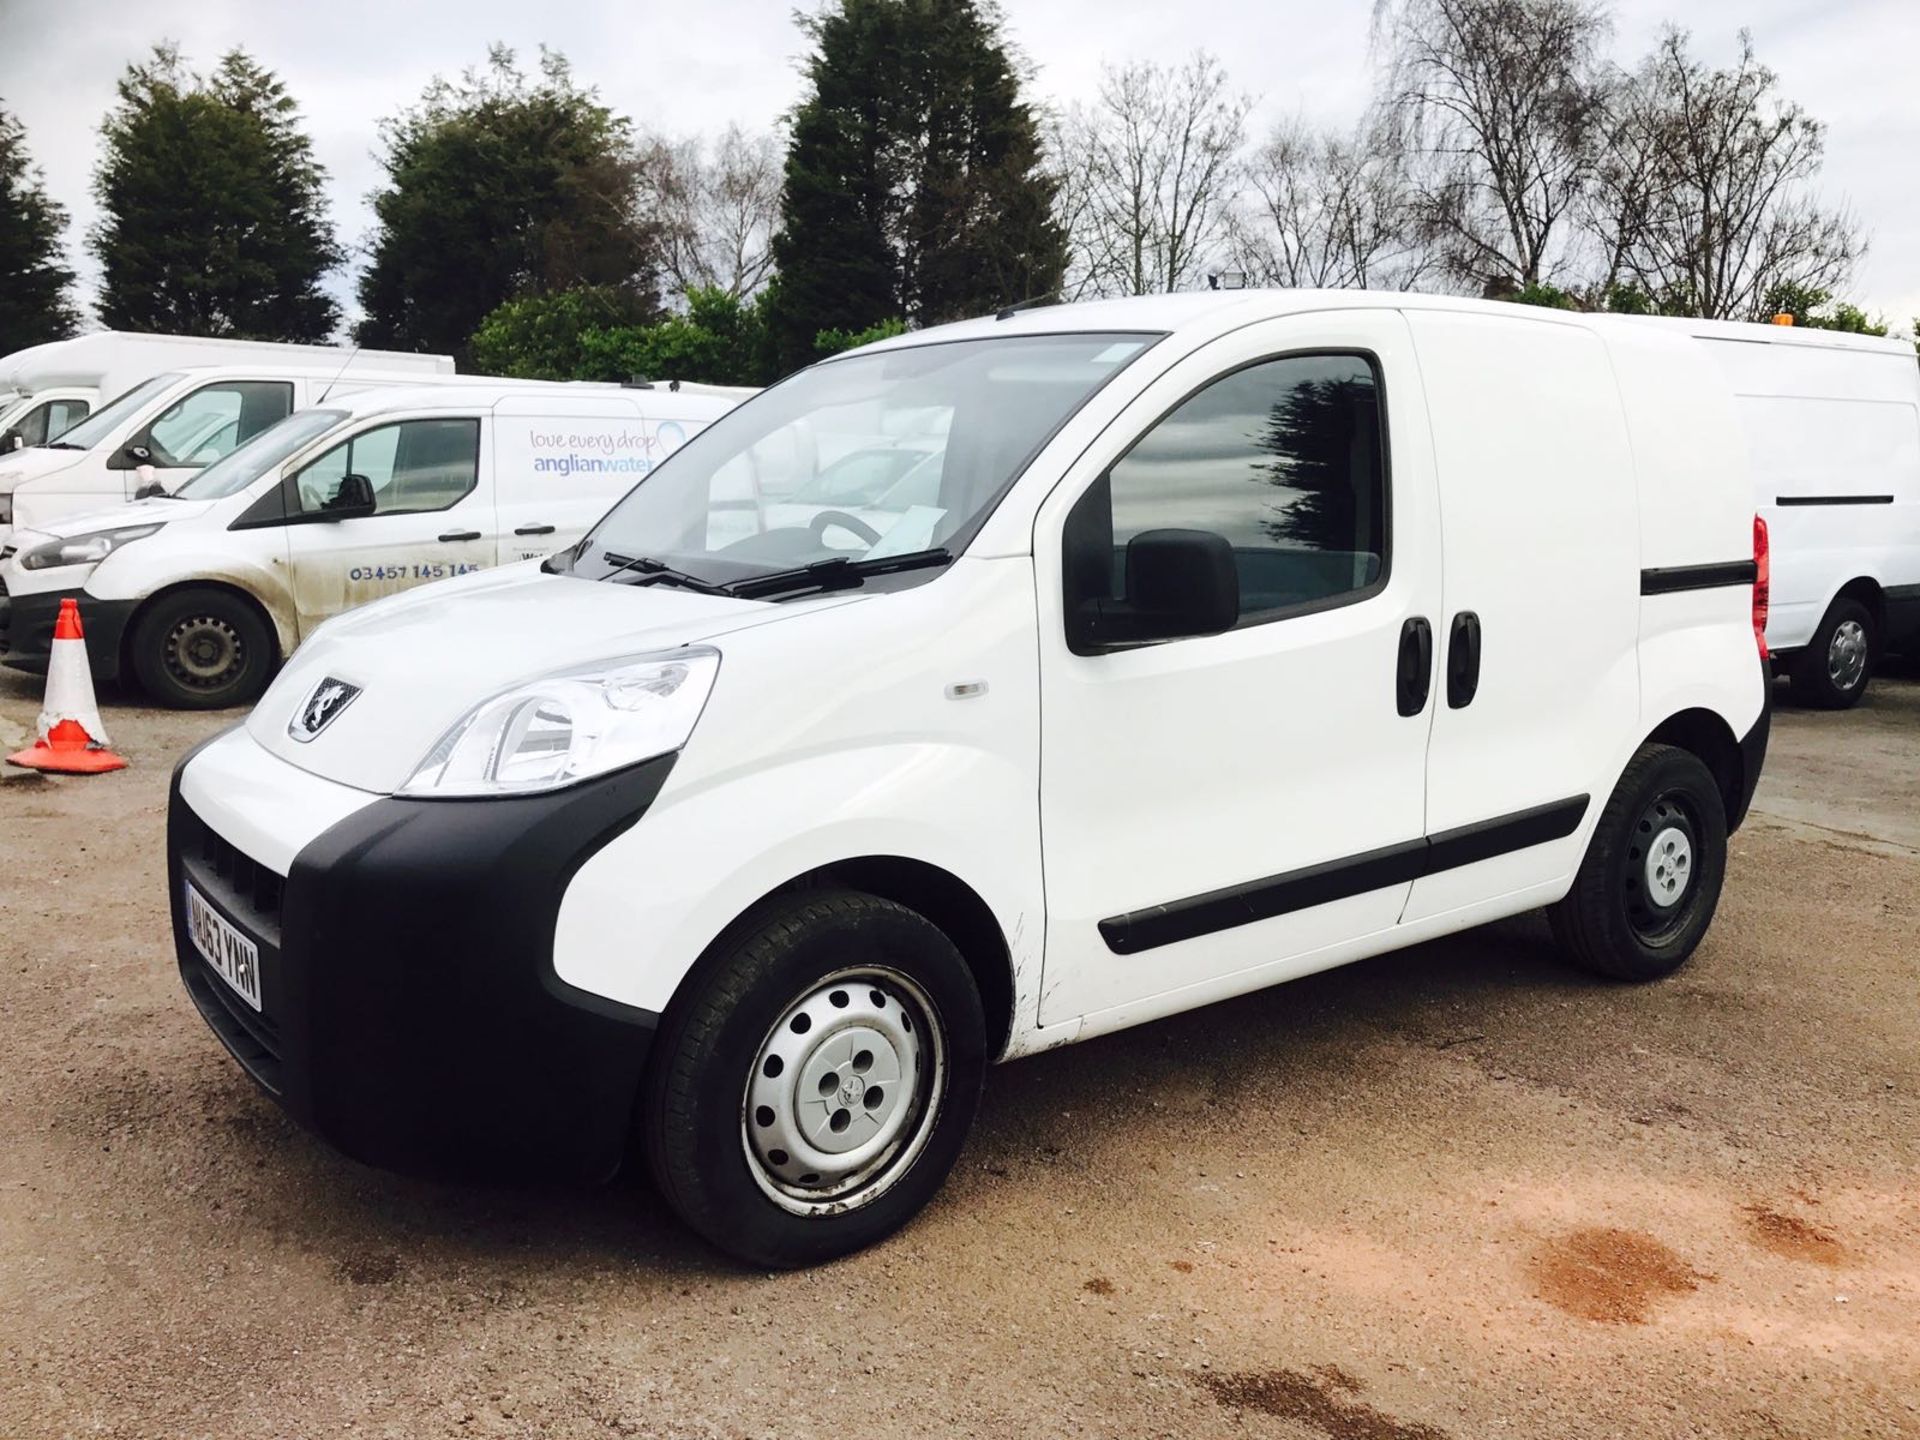 ON SALE PEUGEOT BIPPER 1.3HDI "PLUS PACK" - 2014 MODEL - 1 OWNER - AIR CON - BLUETOOTH - LOW MILES!!